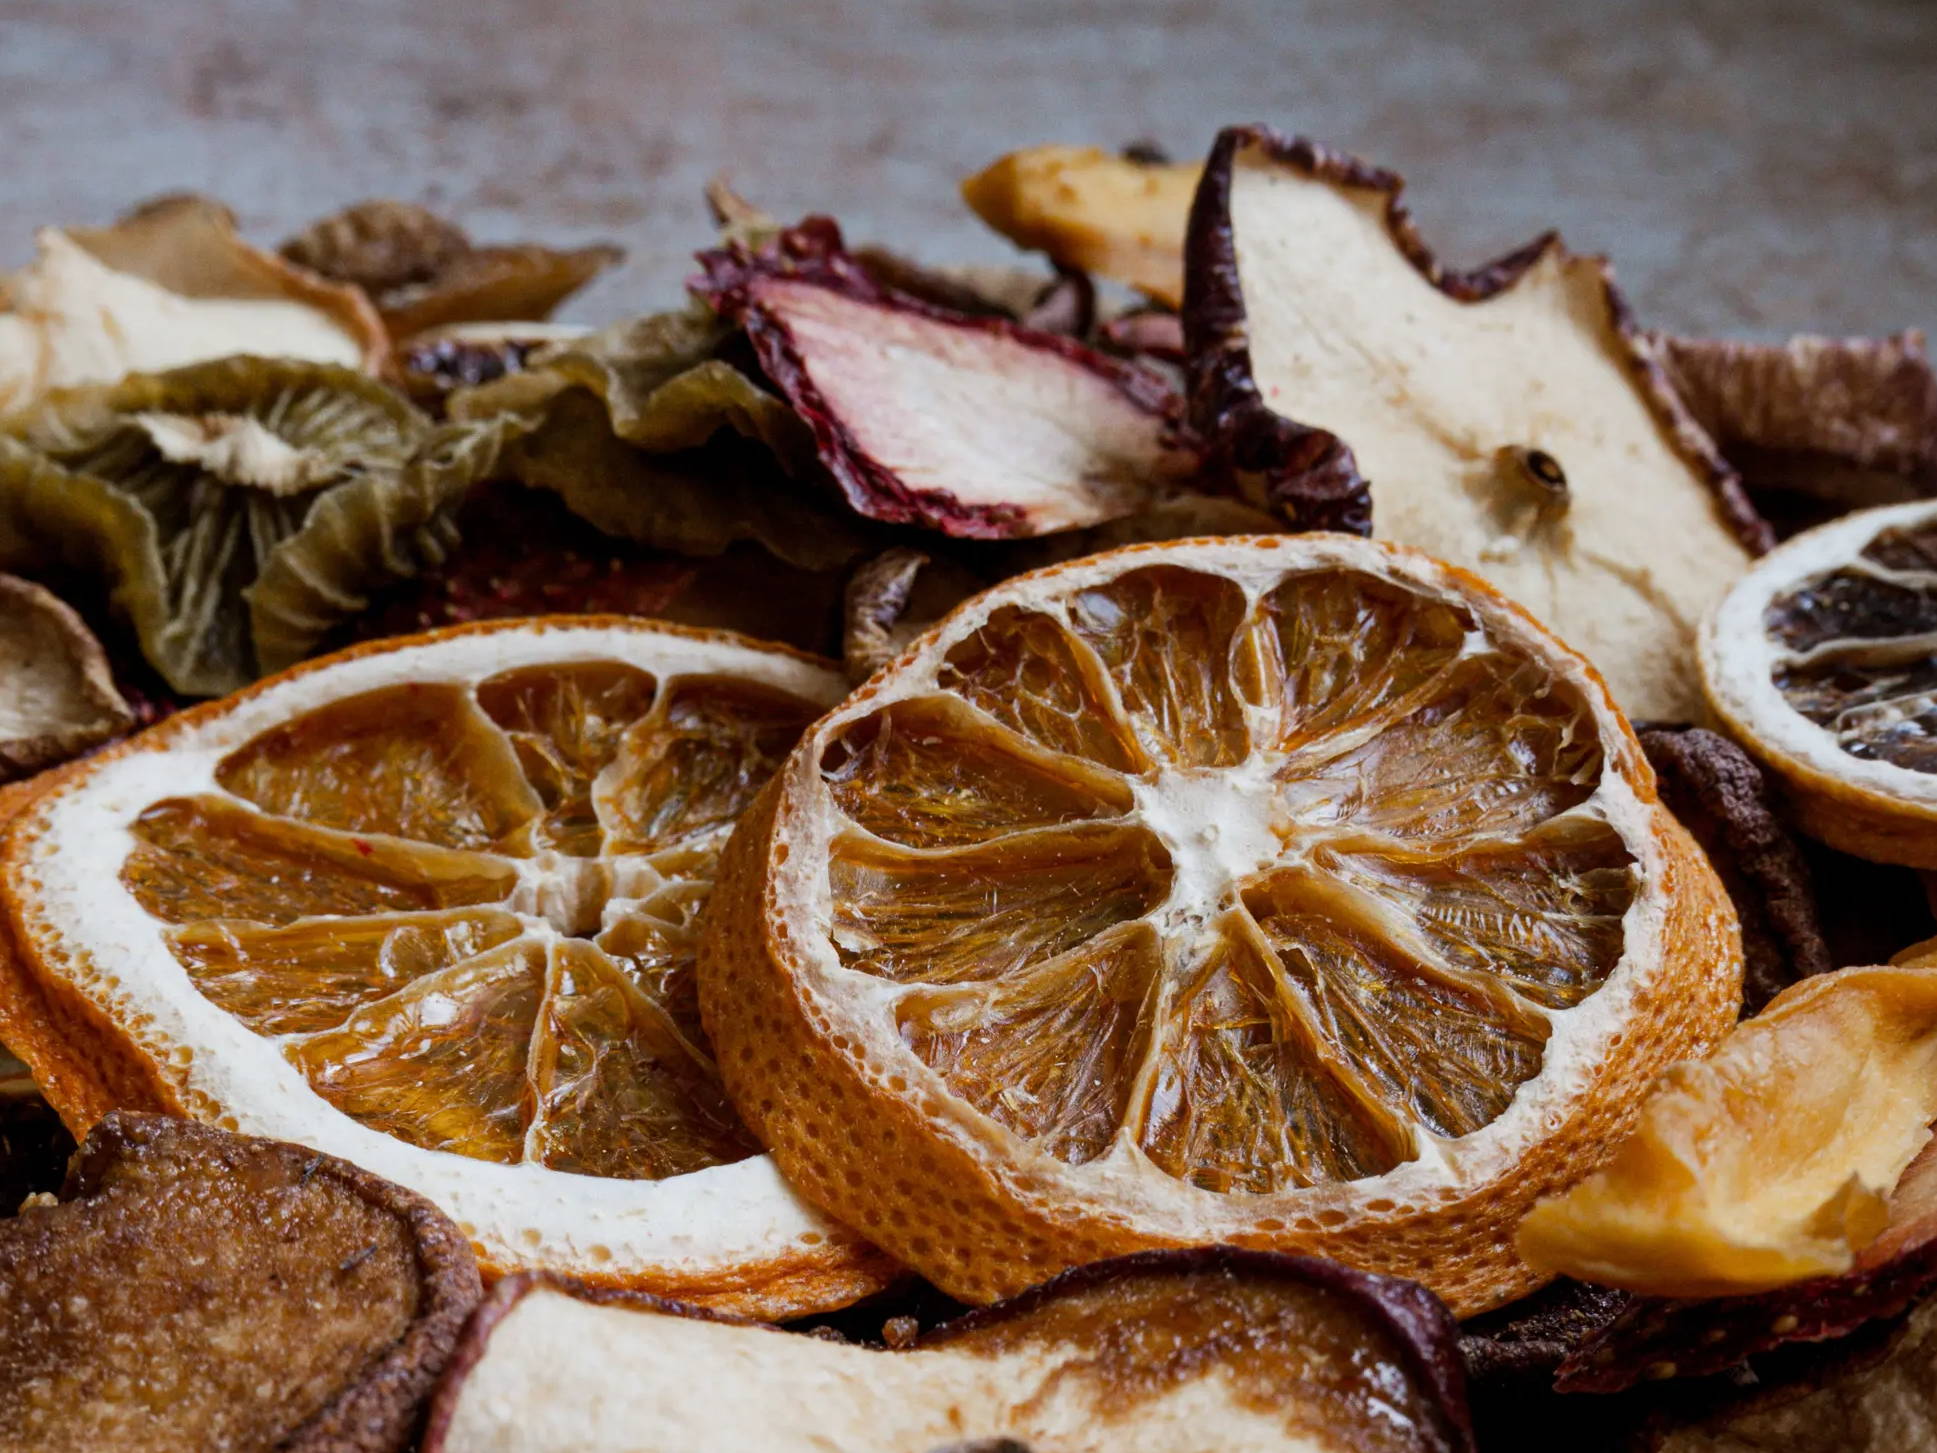 Dried apple and orange slices